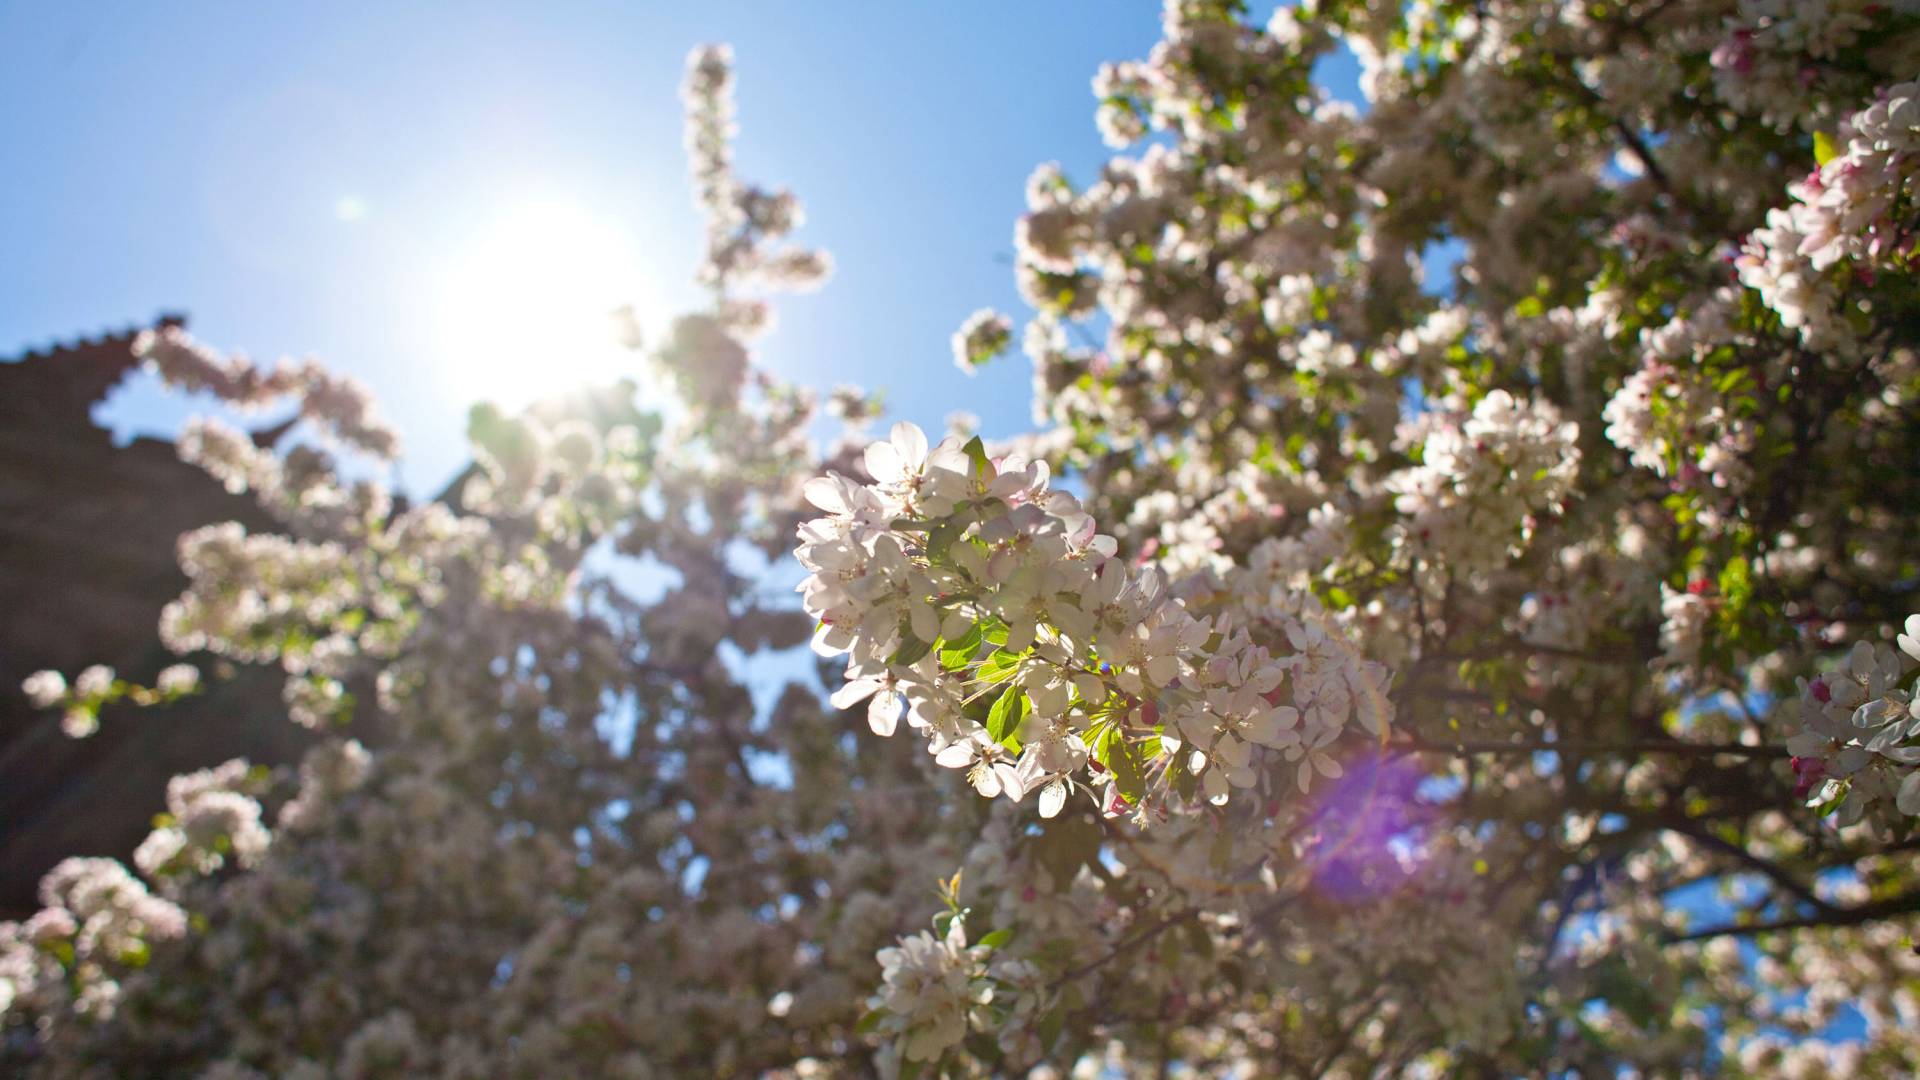 light through flowers on trees on campus in spring